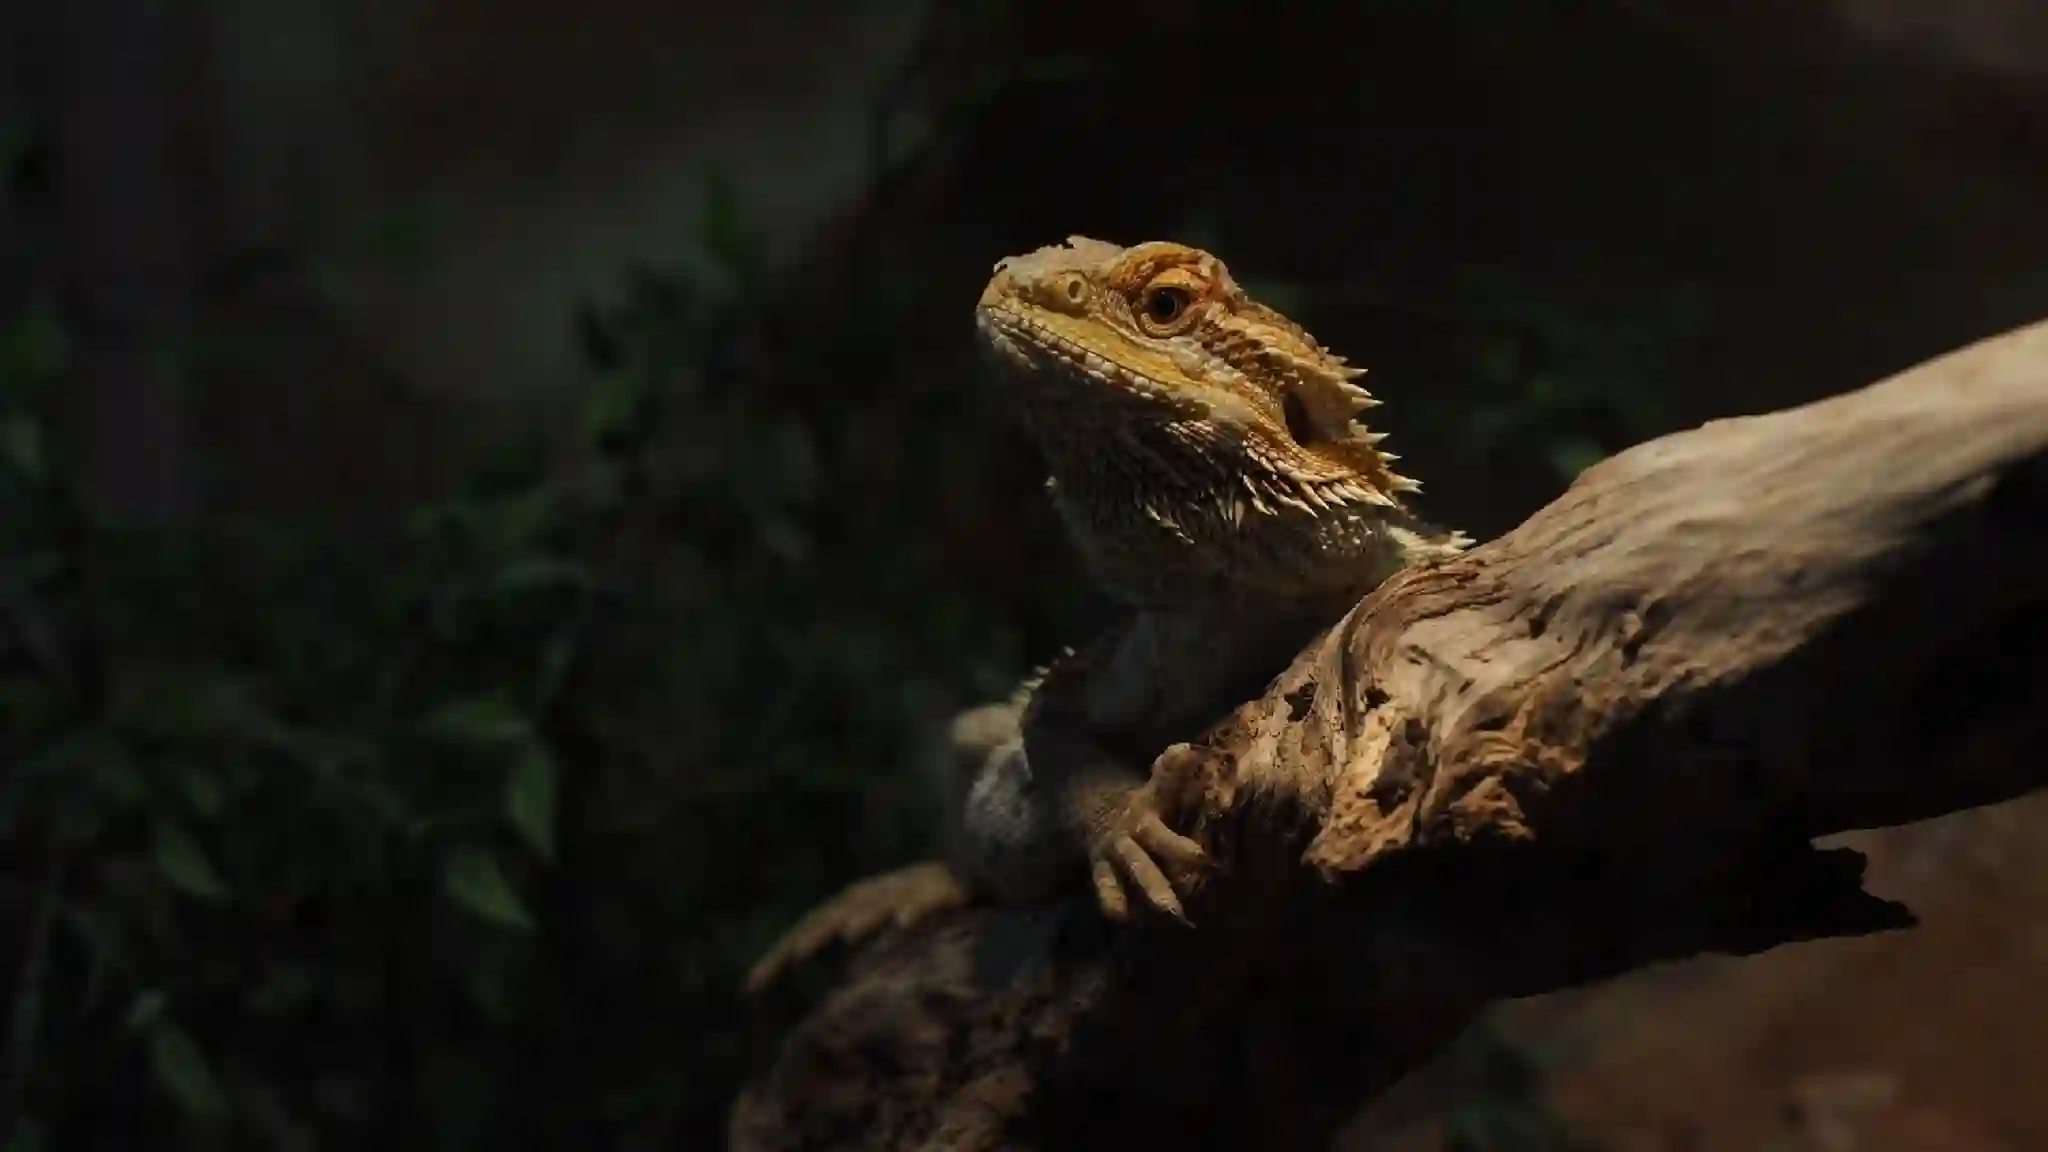 Can Bearded Dragons Eat Wolf Spiders?